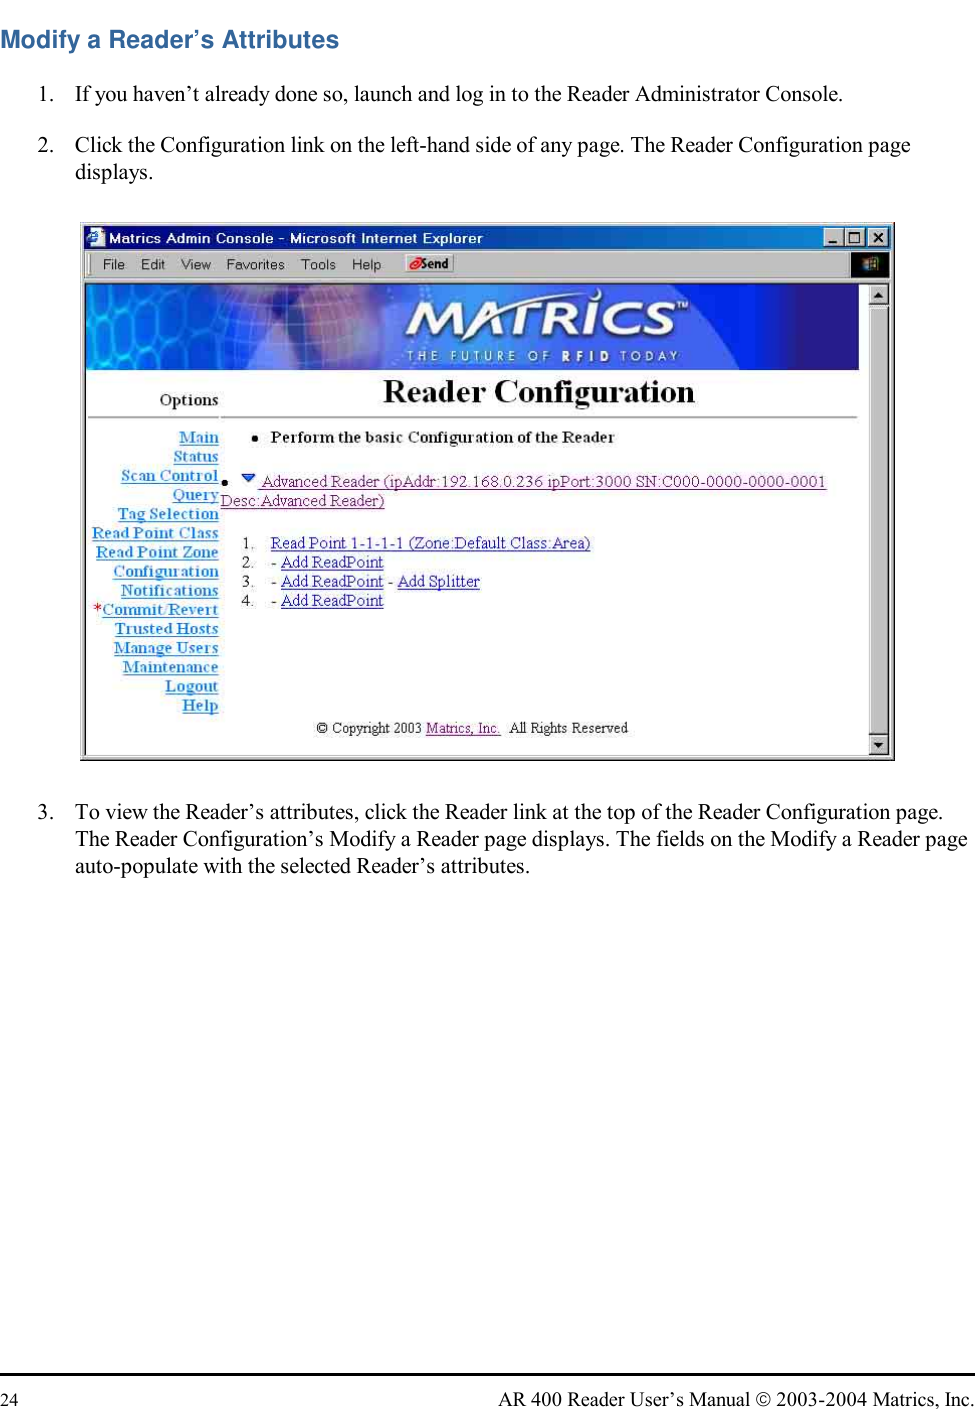  24  AR 400 Reader User’s Manual  2003-2004 Matrics, Inc. Modify a Reader’s Attributes 1.  If you haven’t already done so, launch and log in to the Reader Administrator Console. 2.  Click the Configuration link on the left-hand side of any page. The Reader Configuration page displays.  3.  To view the Reader’s attributes, click the Reader link at the top of the Reader Configuration page. The Reader Configuration’s Modify a Reader page displays. The fields on the Modify a Reader page auto-populate with the selected Reader’s attributes.  